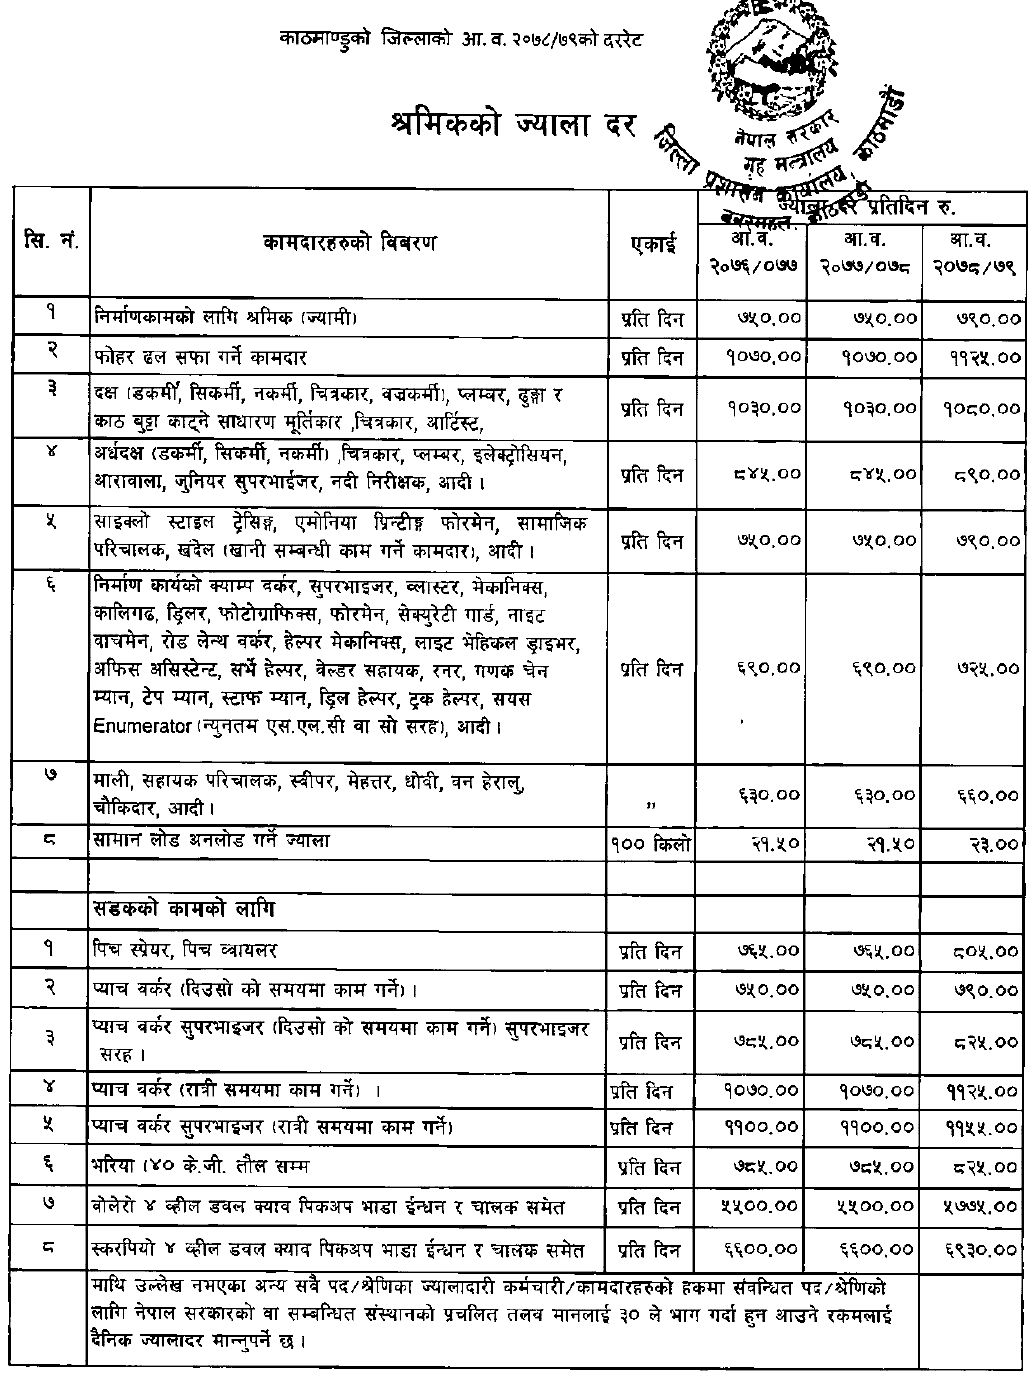 New wage Rate Fixed in Kathmandu District for the Fiscal Year 2078/79